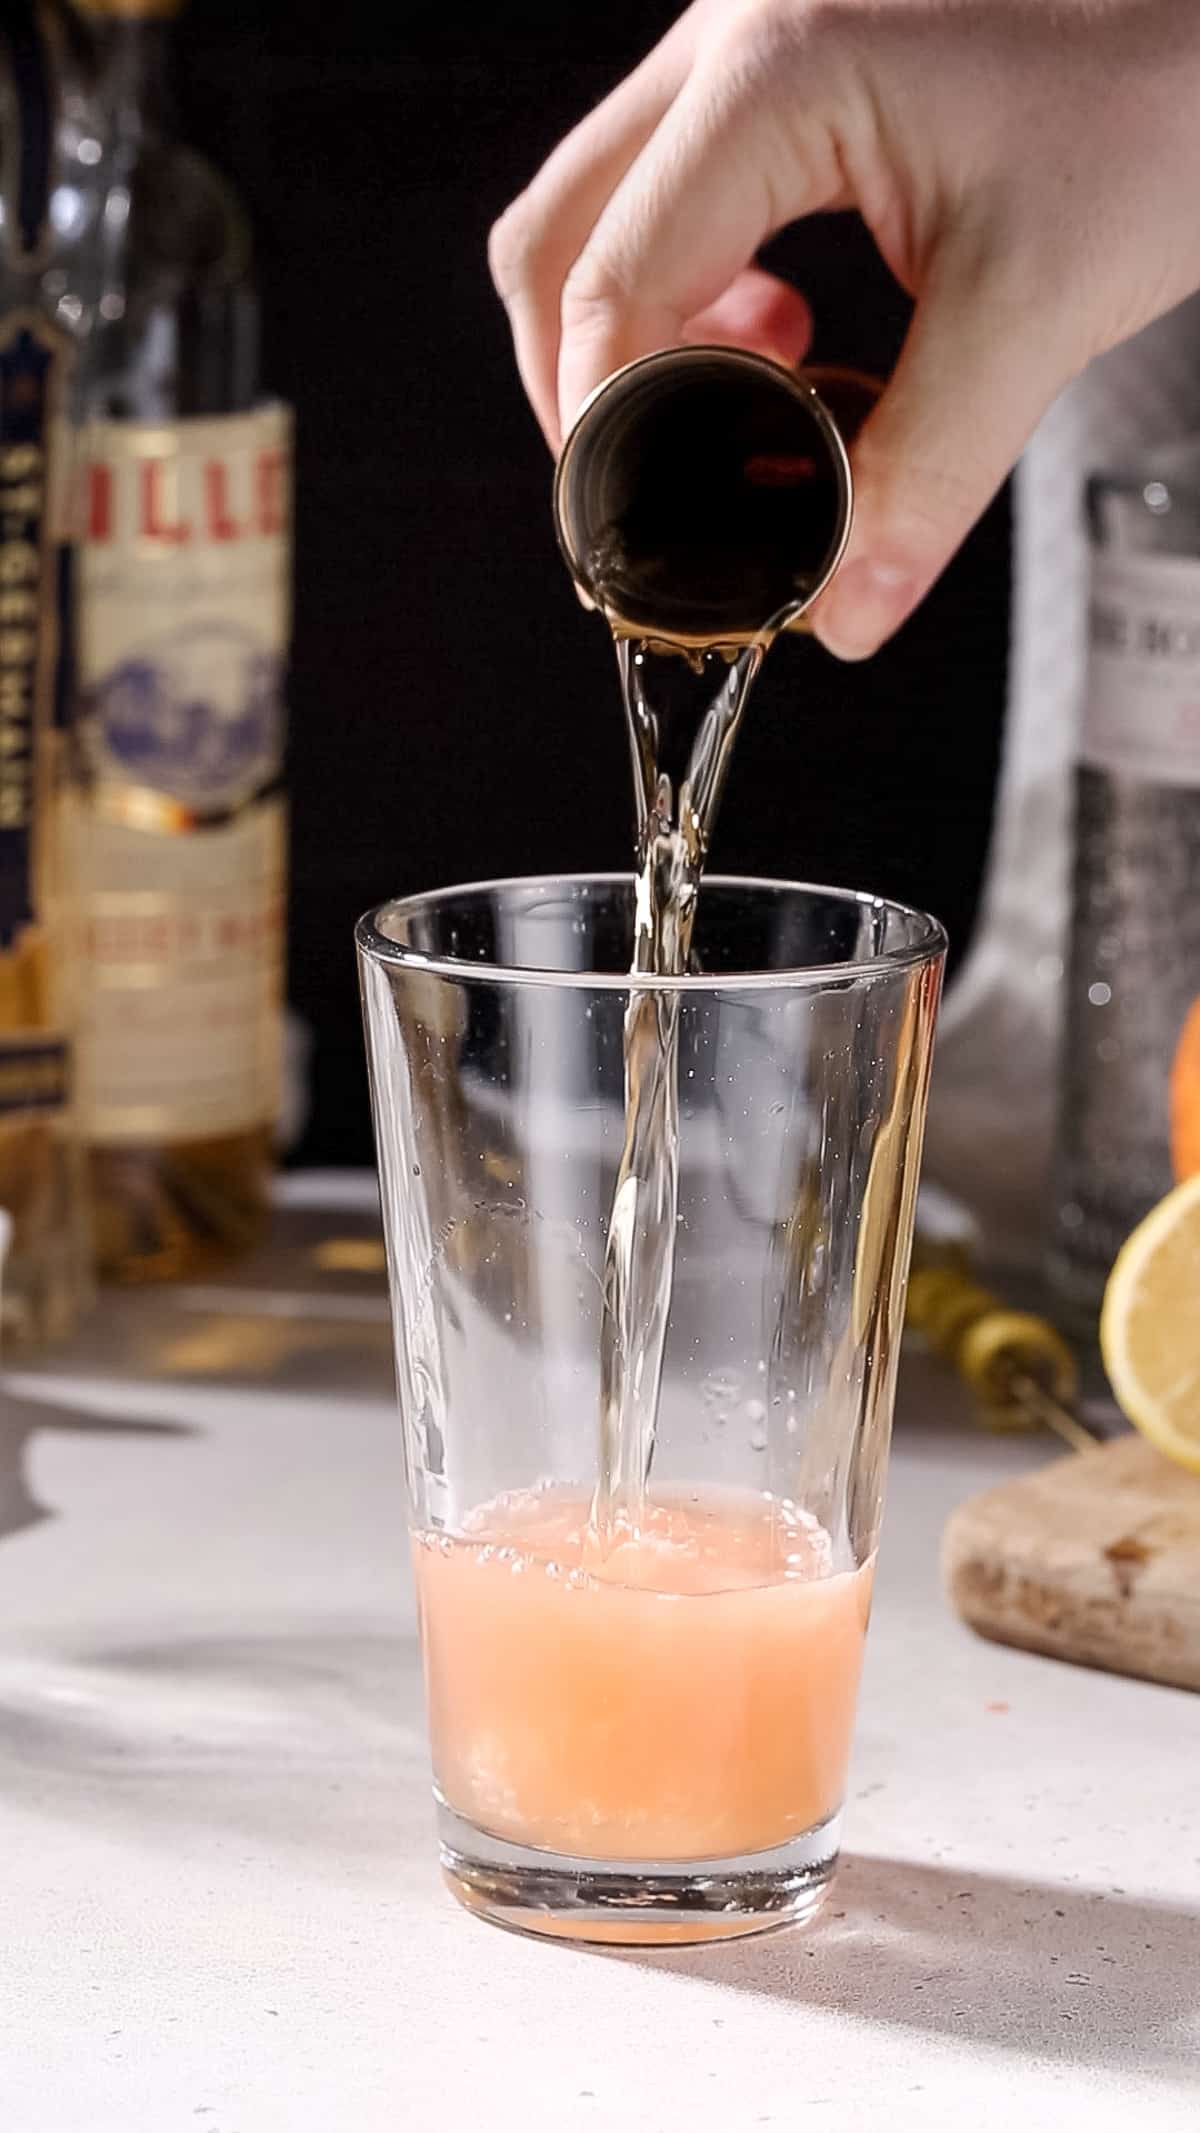 Hand pouring lillet blanc into a cocktail shaker.